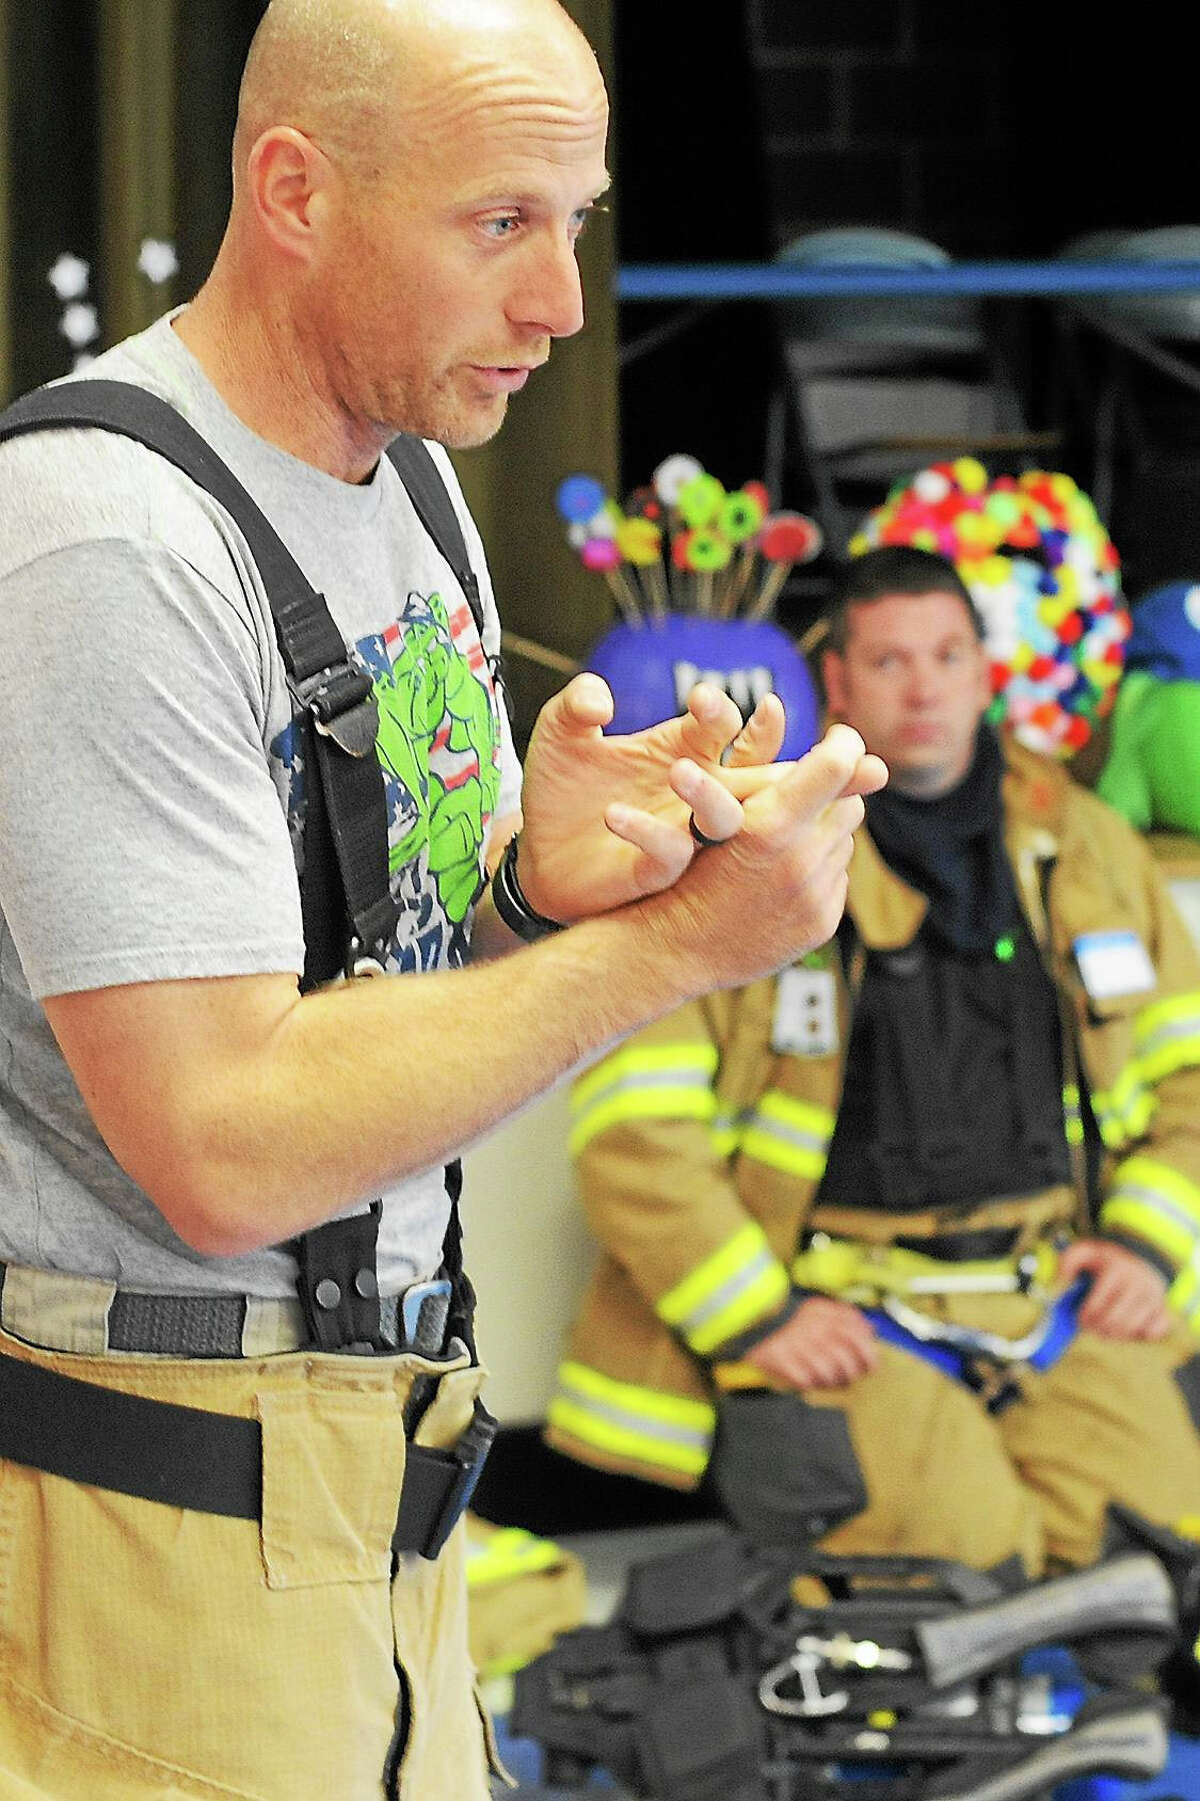 Last year, members of the Haddam Volunteer Fire Company gave an educational demonstration to elementary school children during fire prevention week.